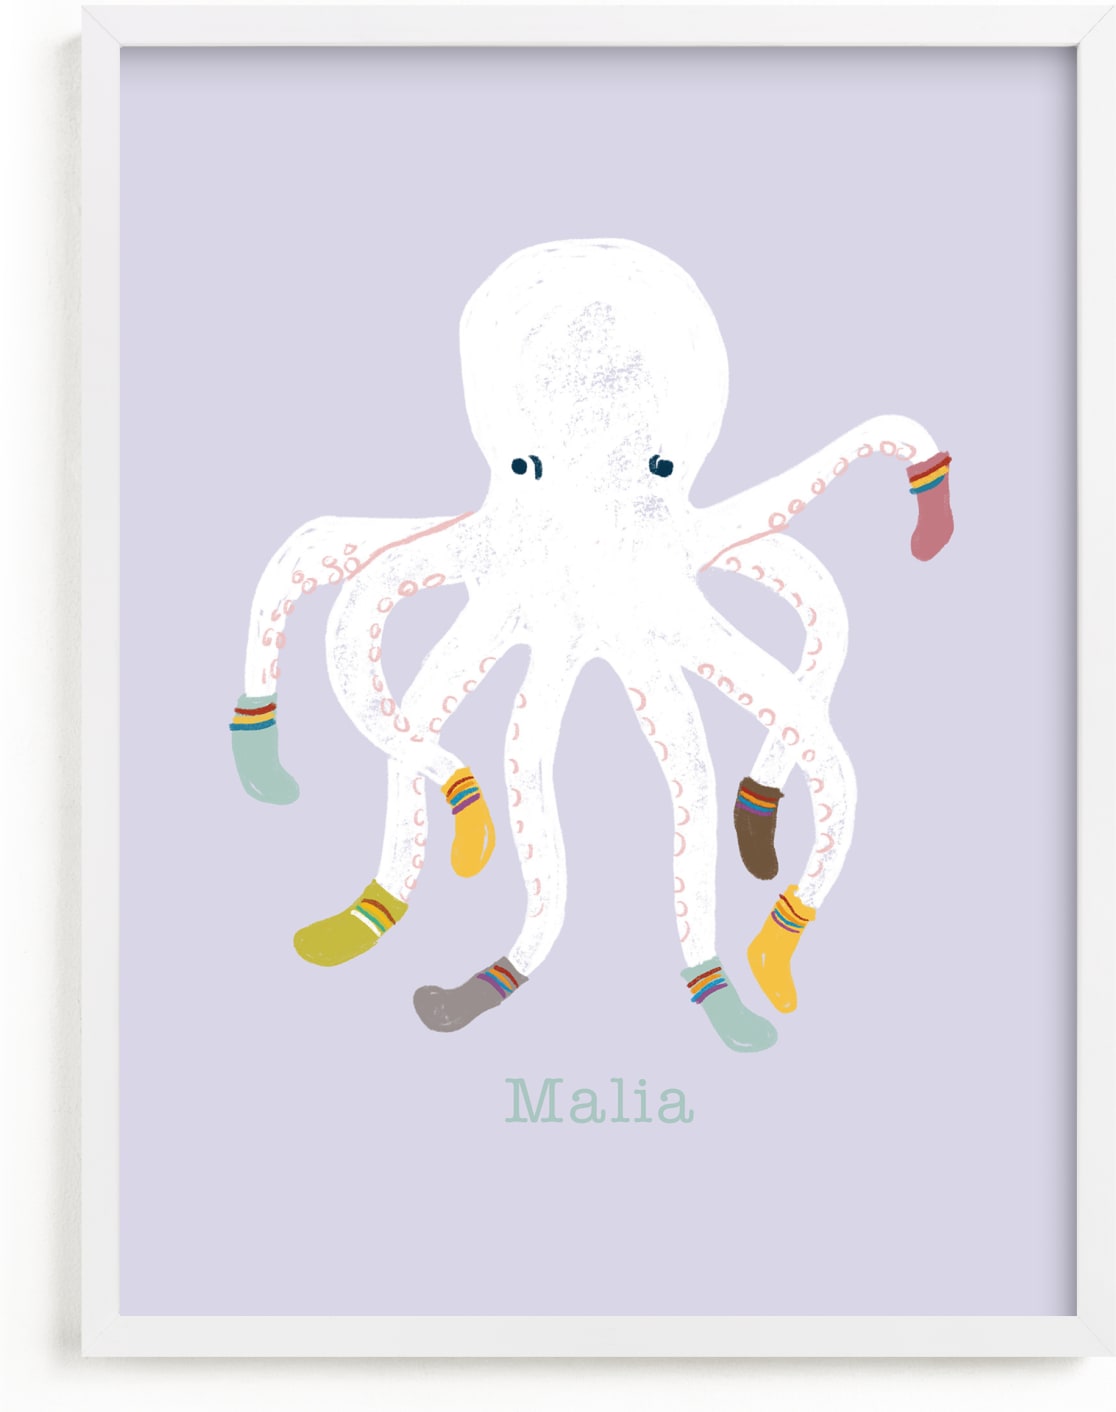 This is a purple personalized art for kid by Celeste Duffy called Socktopus.